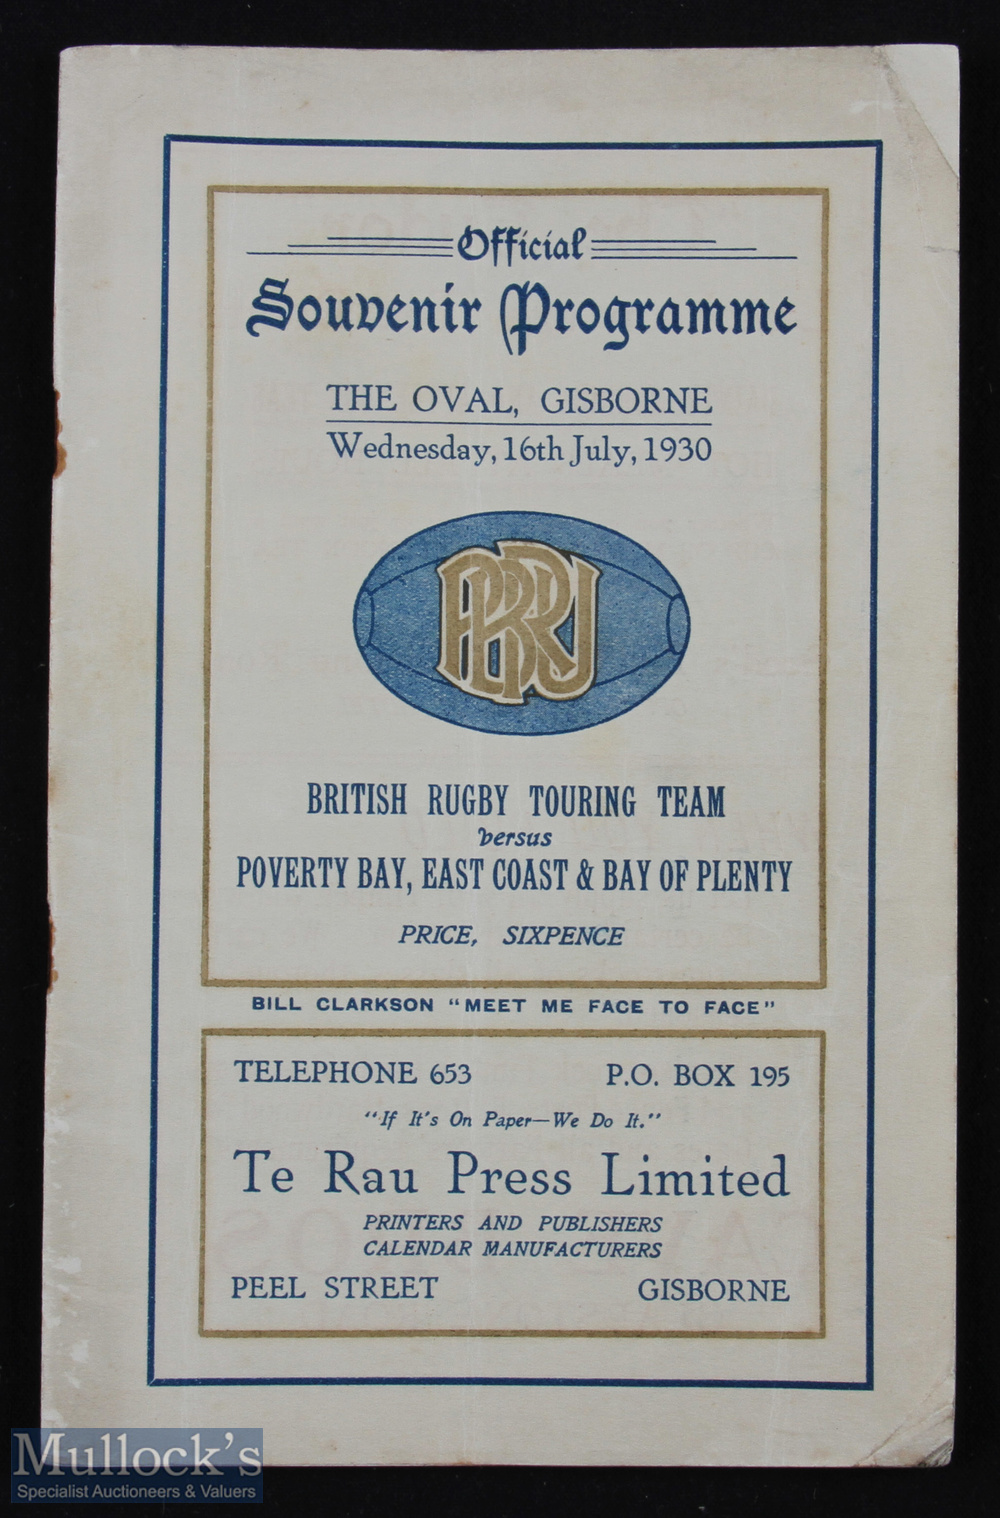 Rare 1930 British Lions in New Zealand Rugby Programme: Seldom seen, the splendidly packed 56 pp